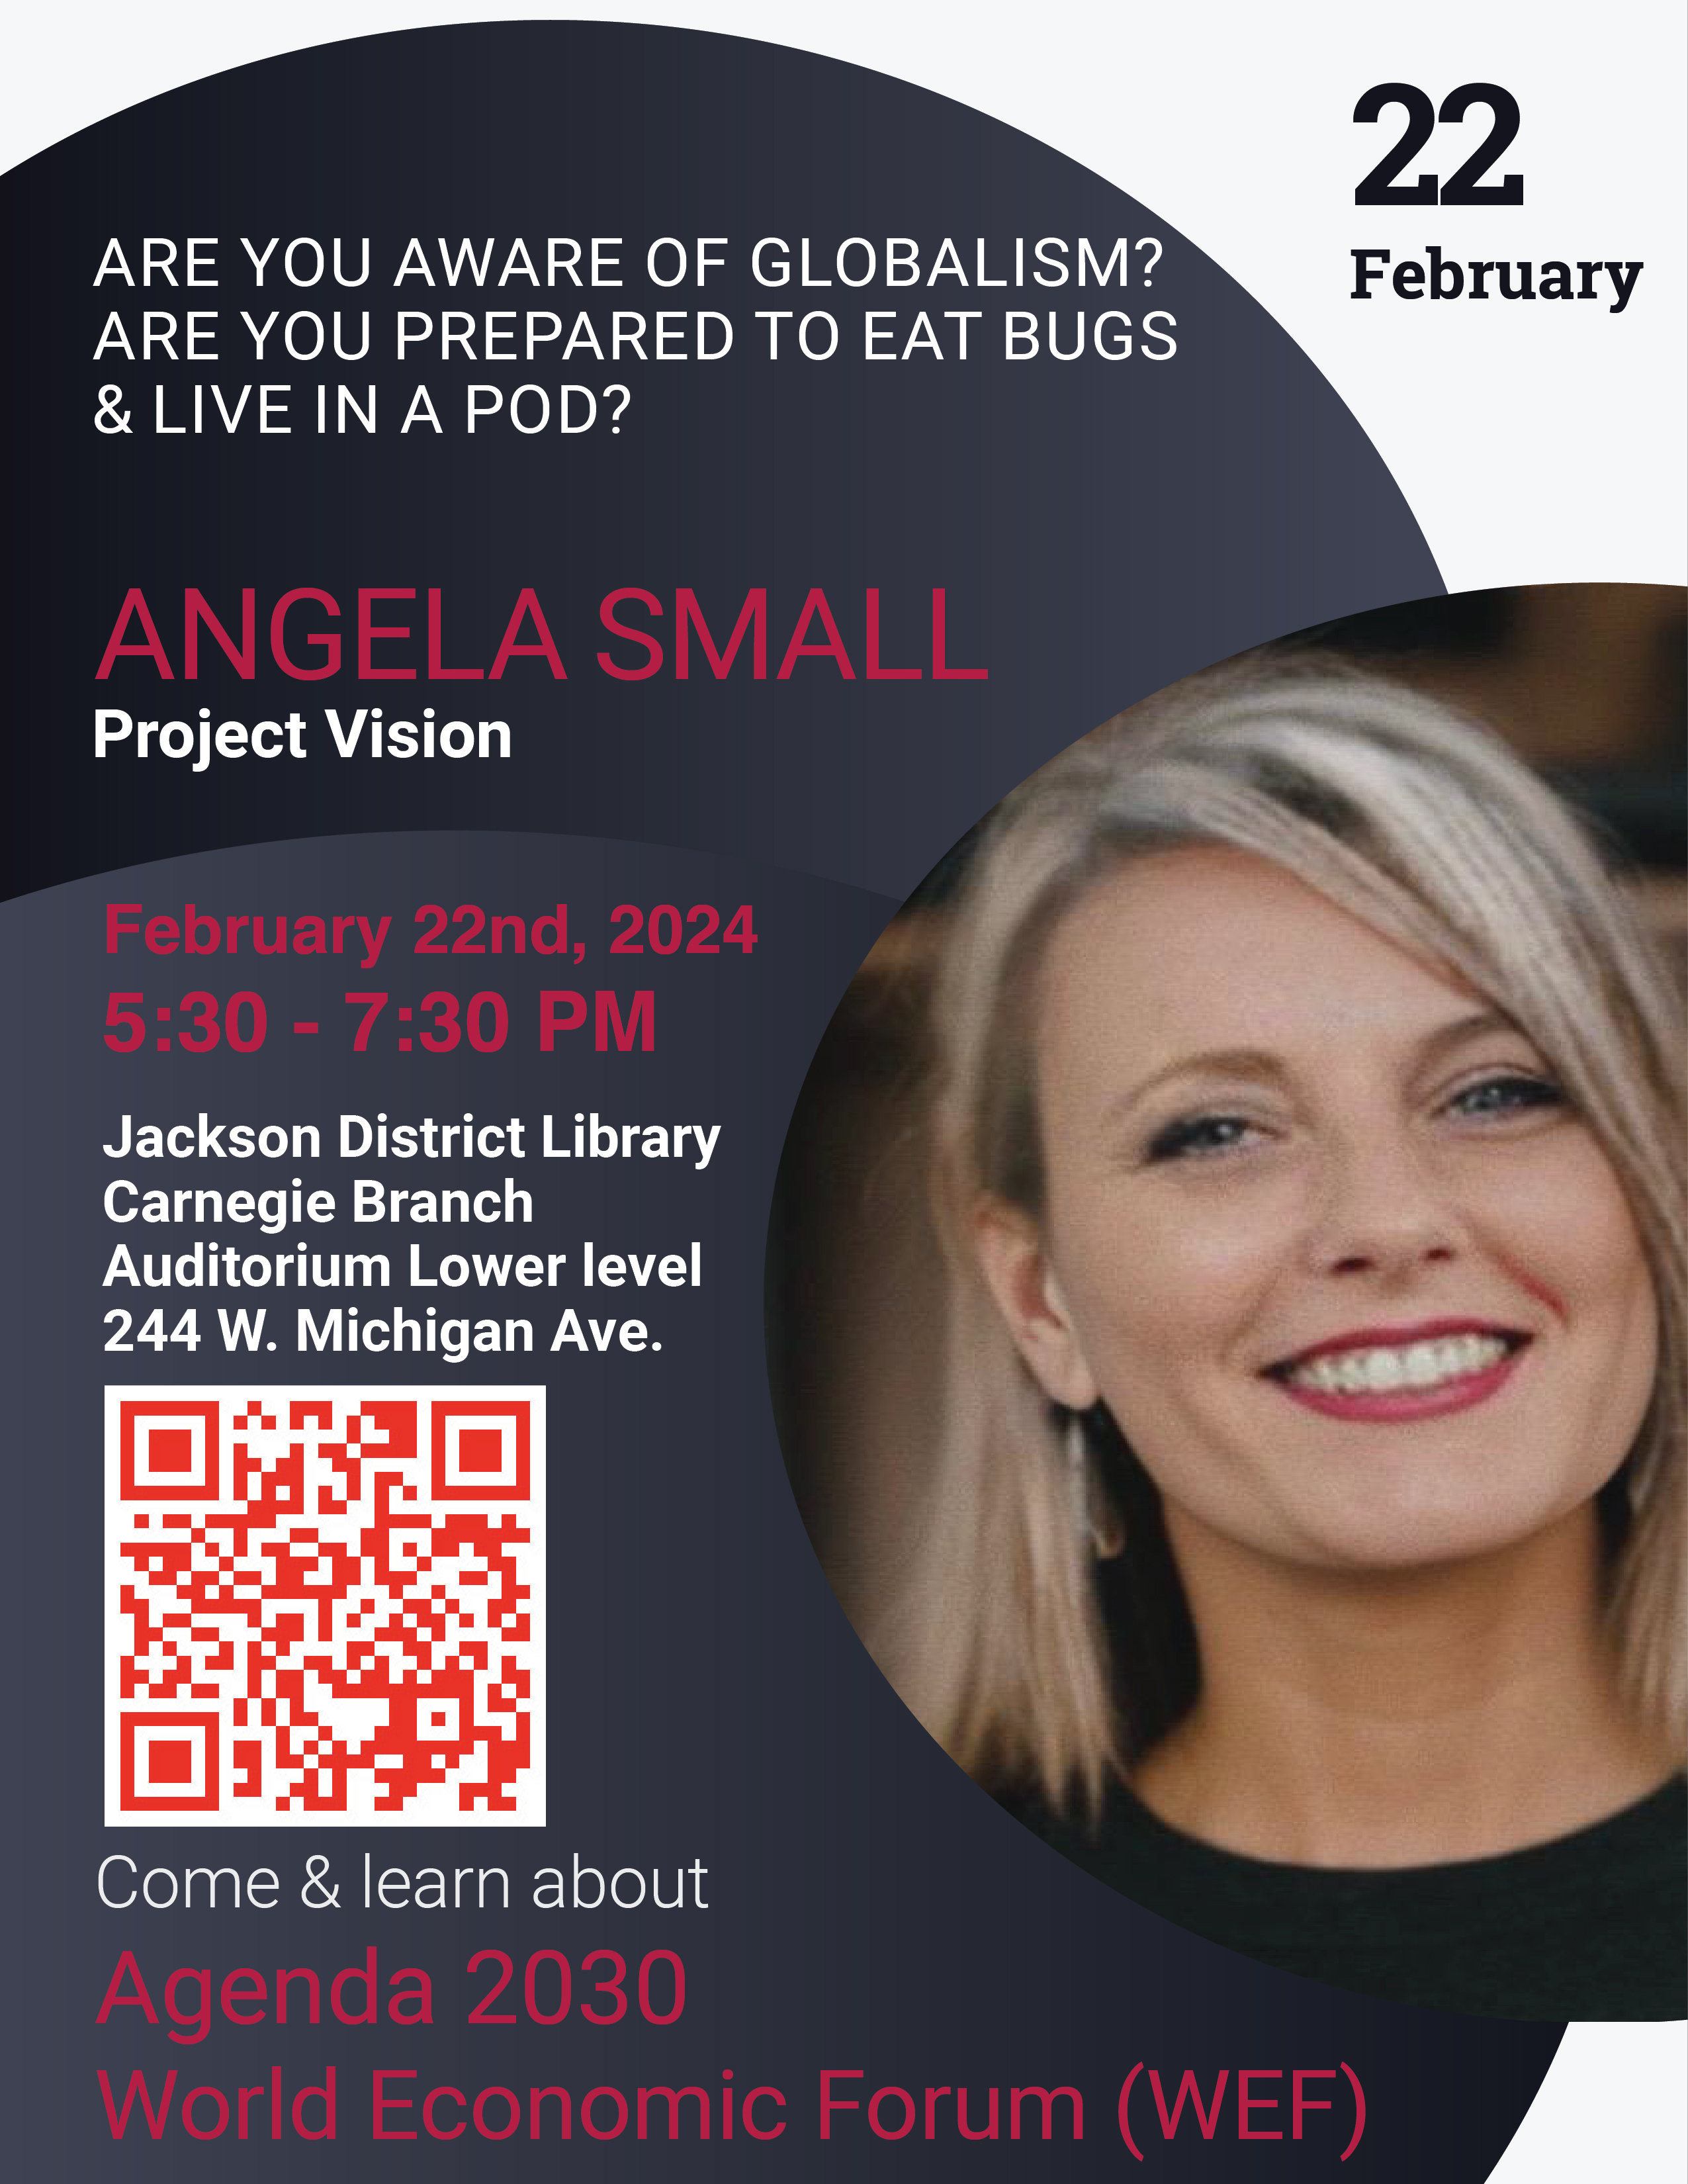 February 22, 2024 - Angela Small, Project 2020 Vision